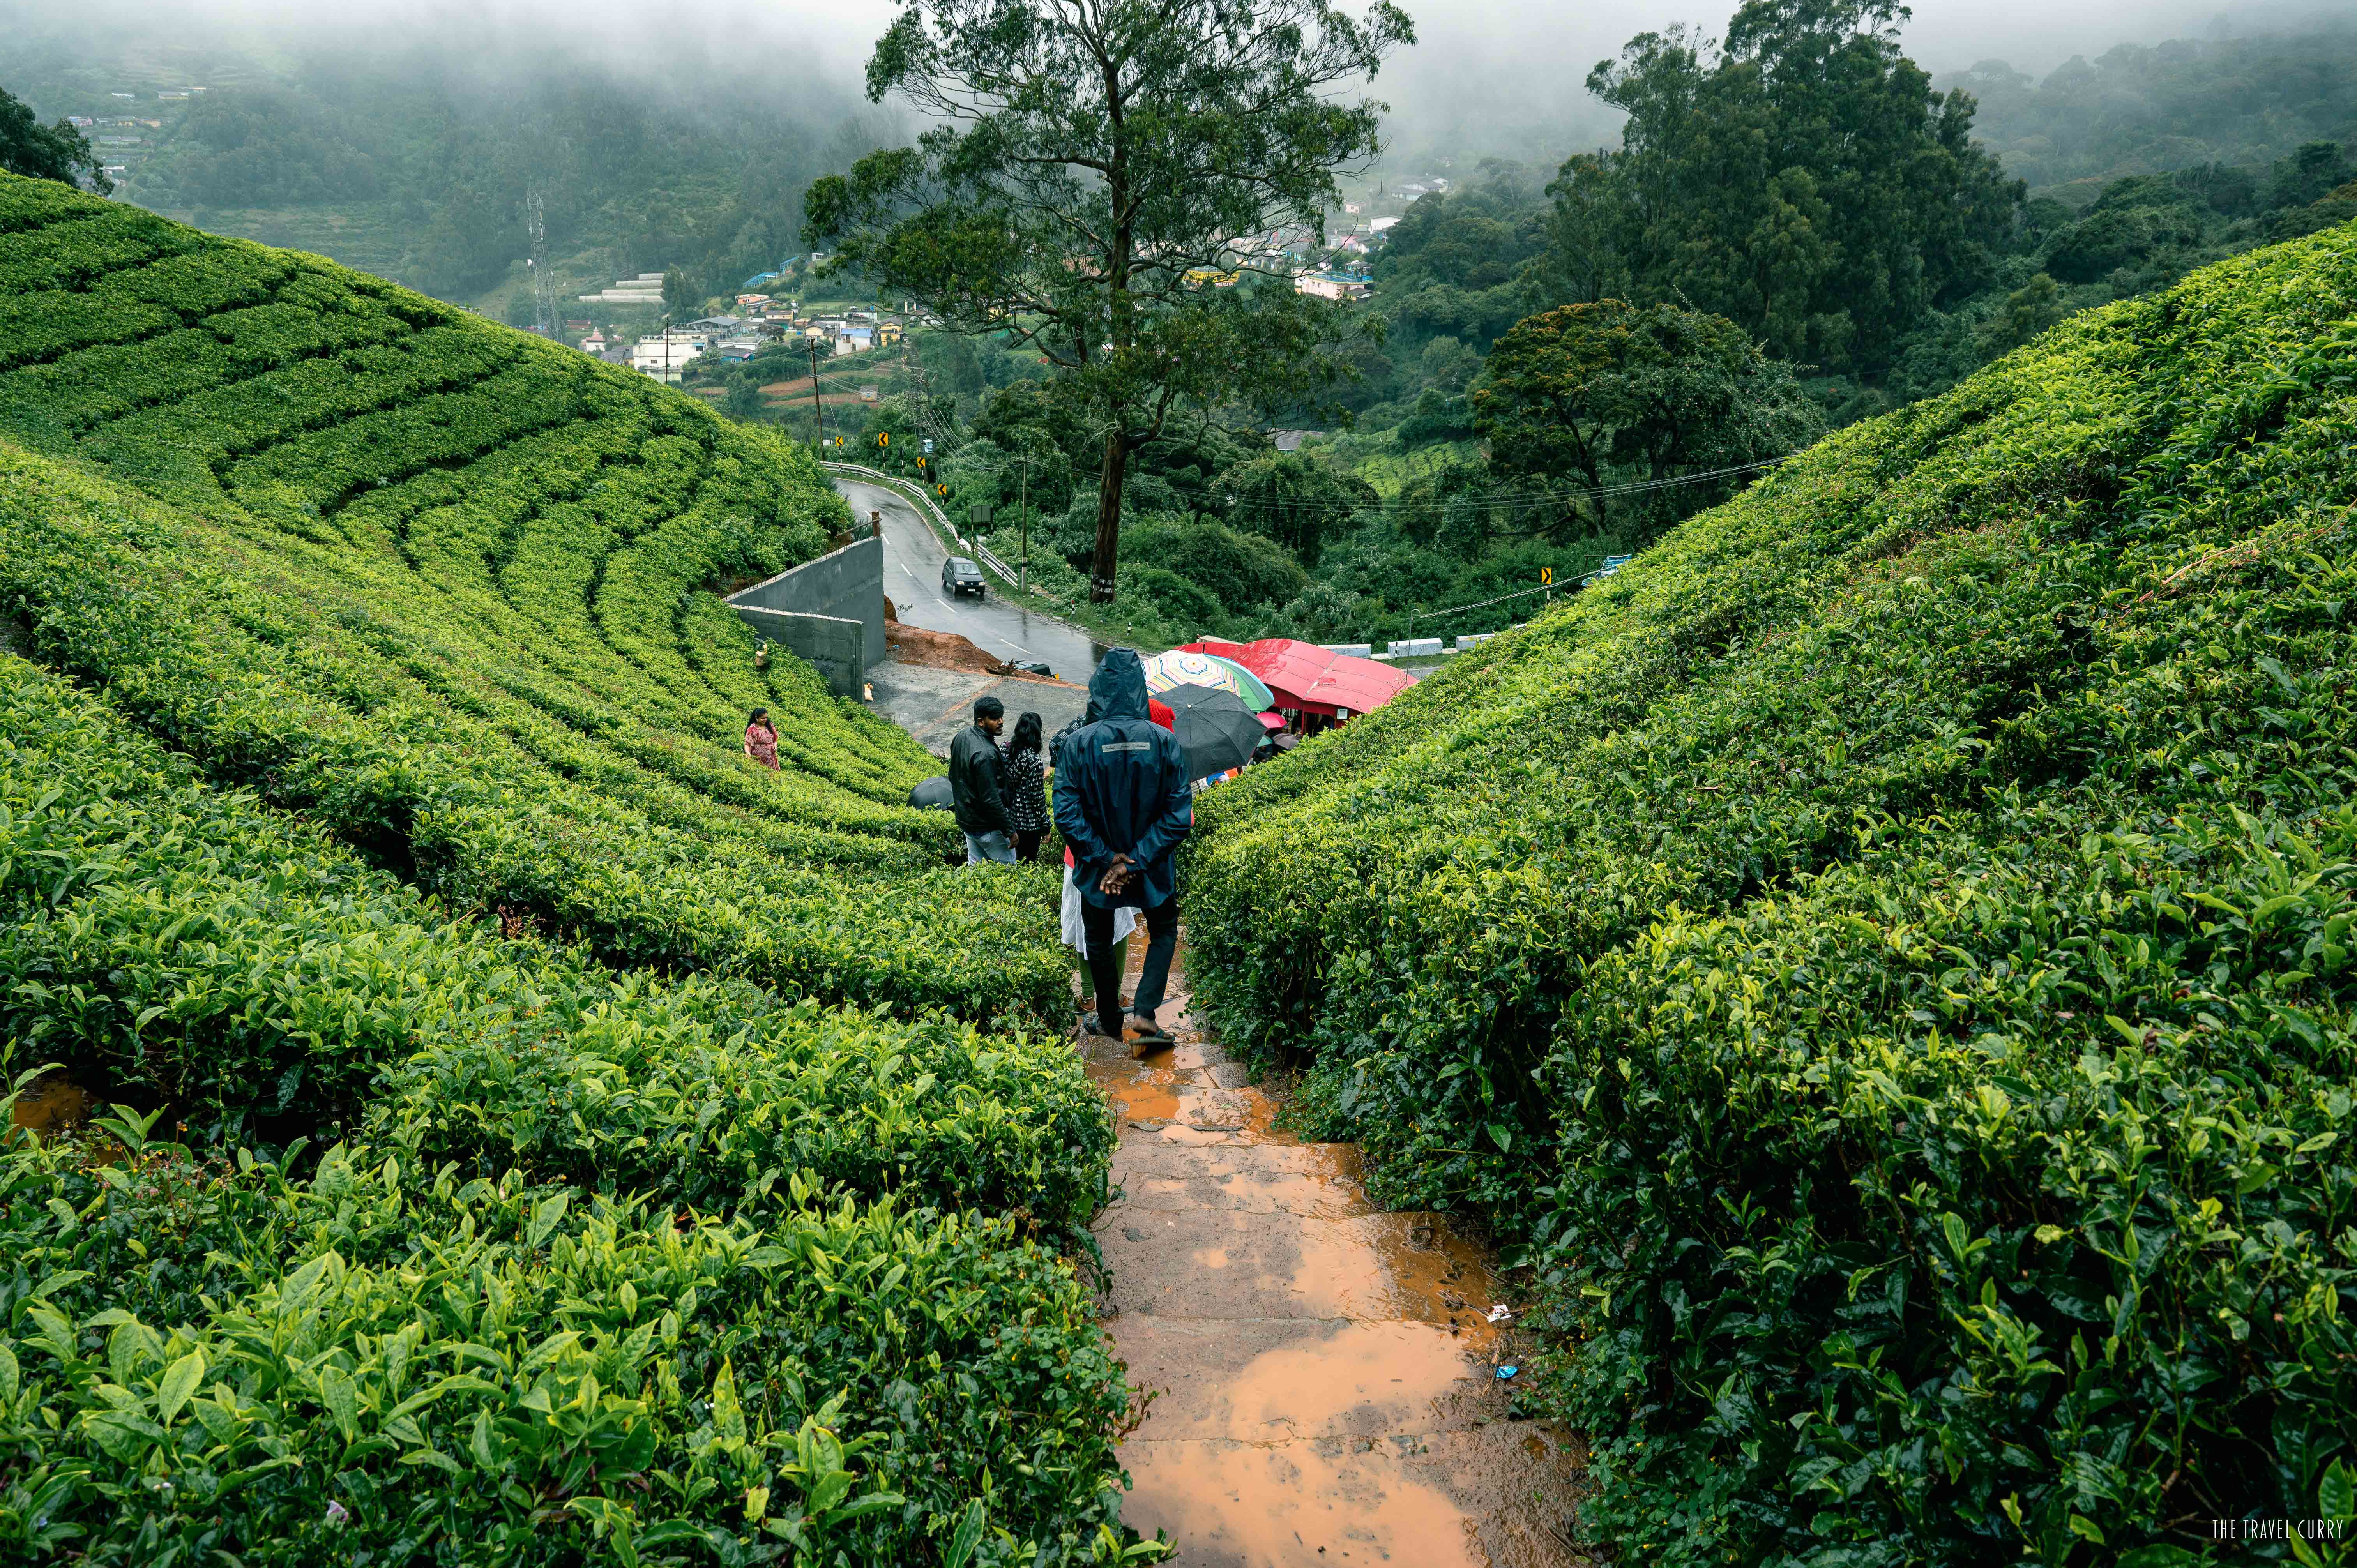 Government Tea Garden is the most exciting place to visit in Ooty